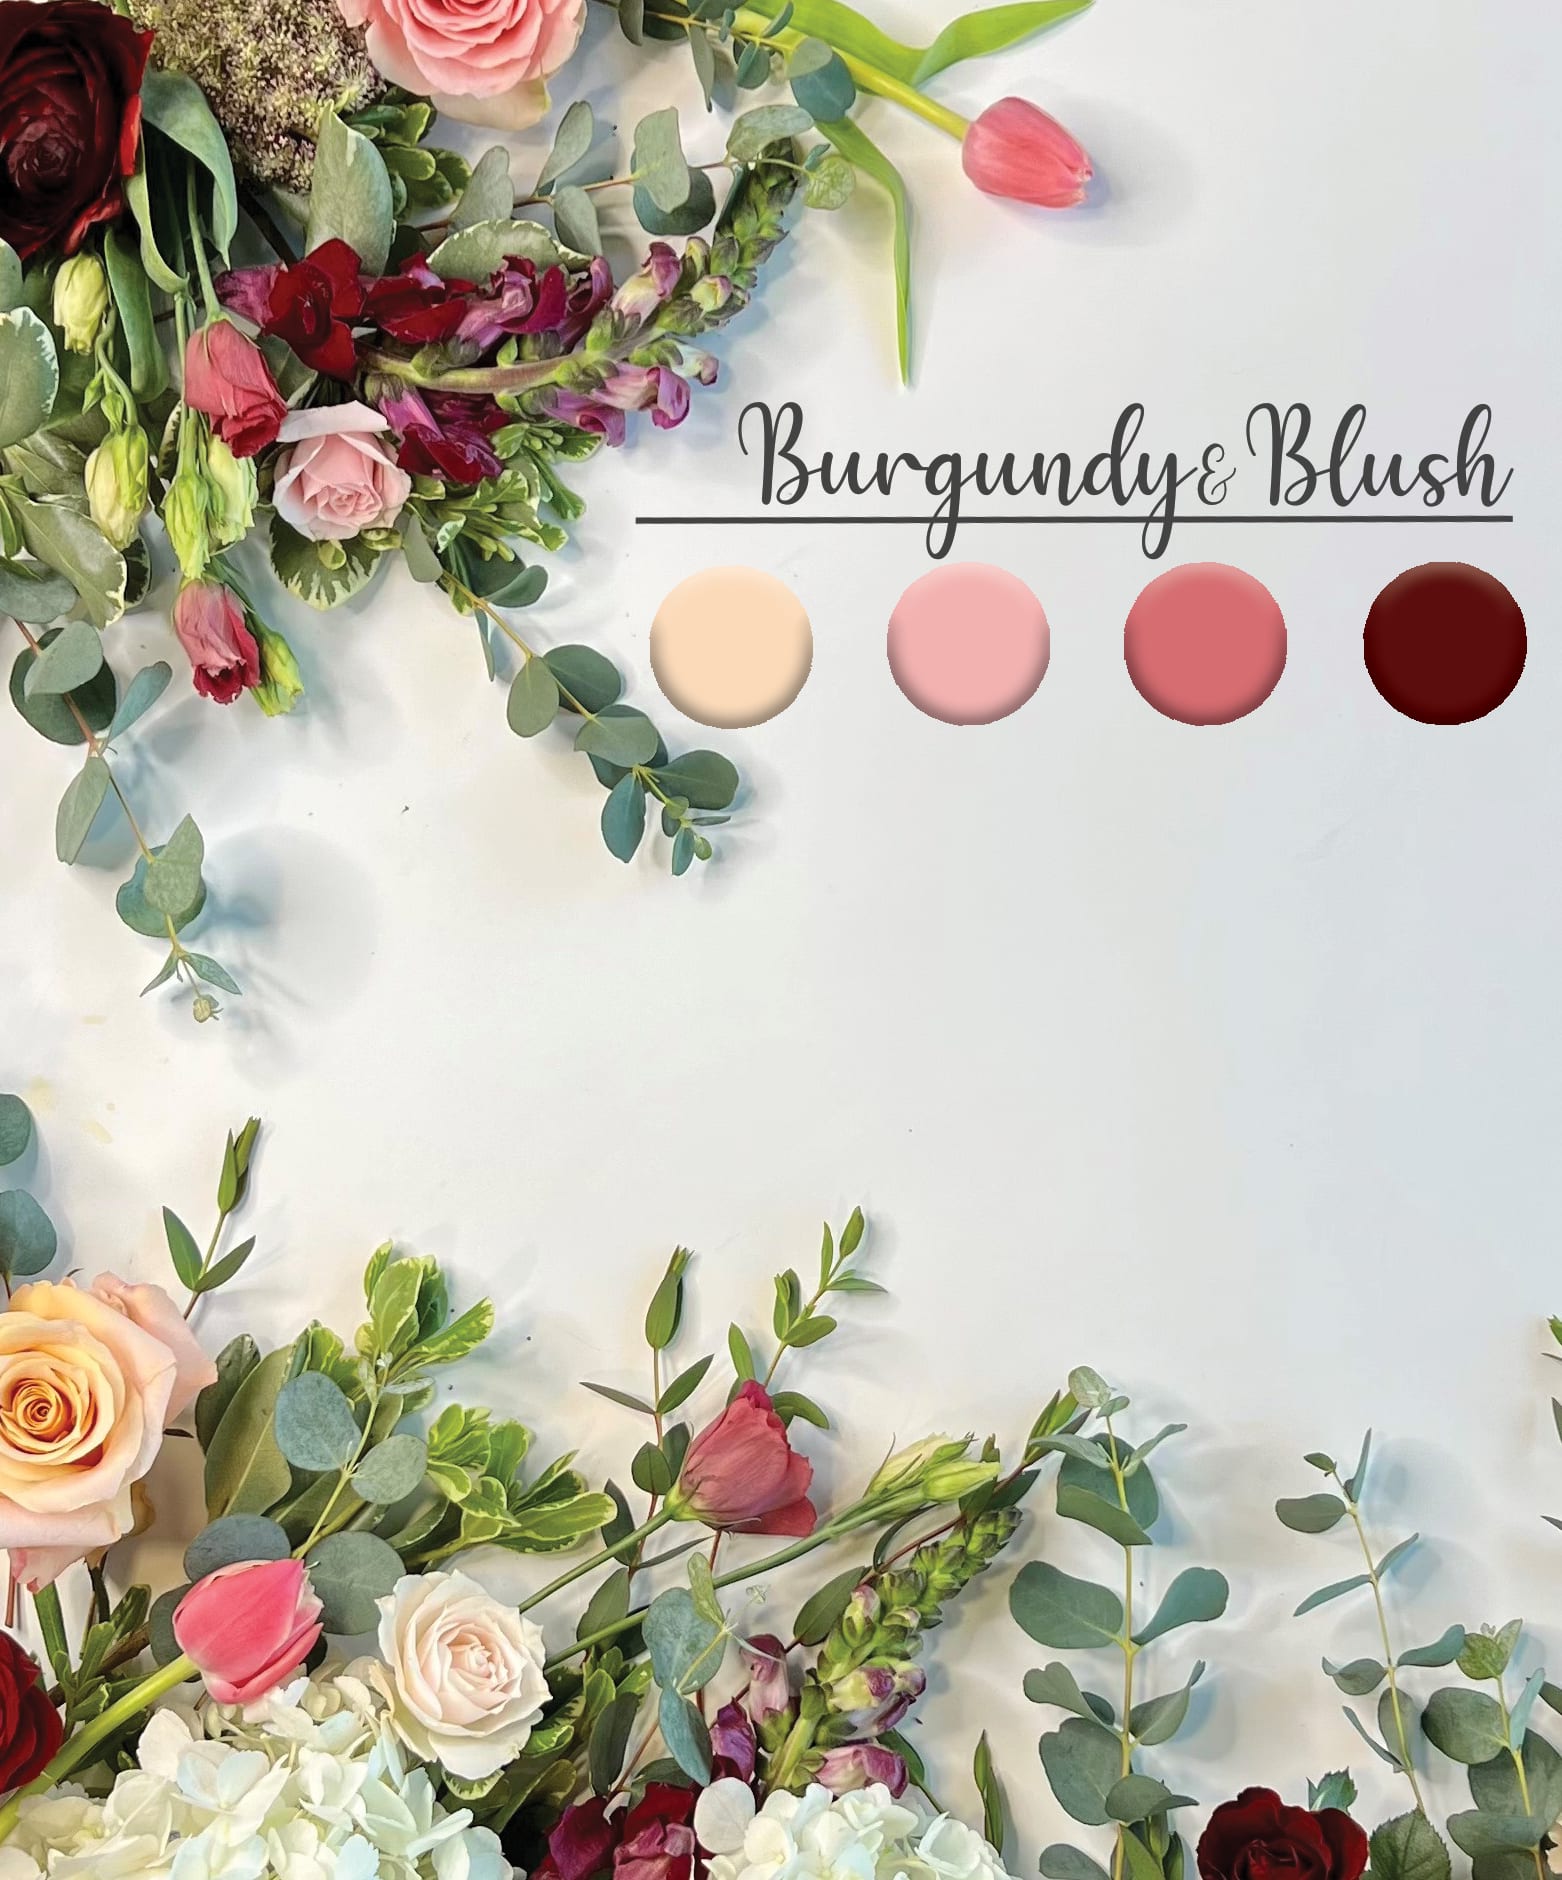 Burgundy and Blush - Our talented designers will use premium flowers in a burgundy &amp; blush color palette to create a gorgeous modern style arrangement!  To see examples of our work, click on the Gallery tab above, or find us on Instagram and Facebook (links can be found at the bottom of this page).